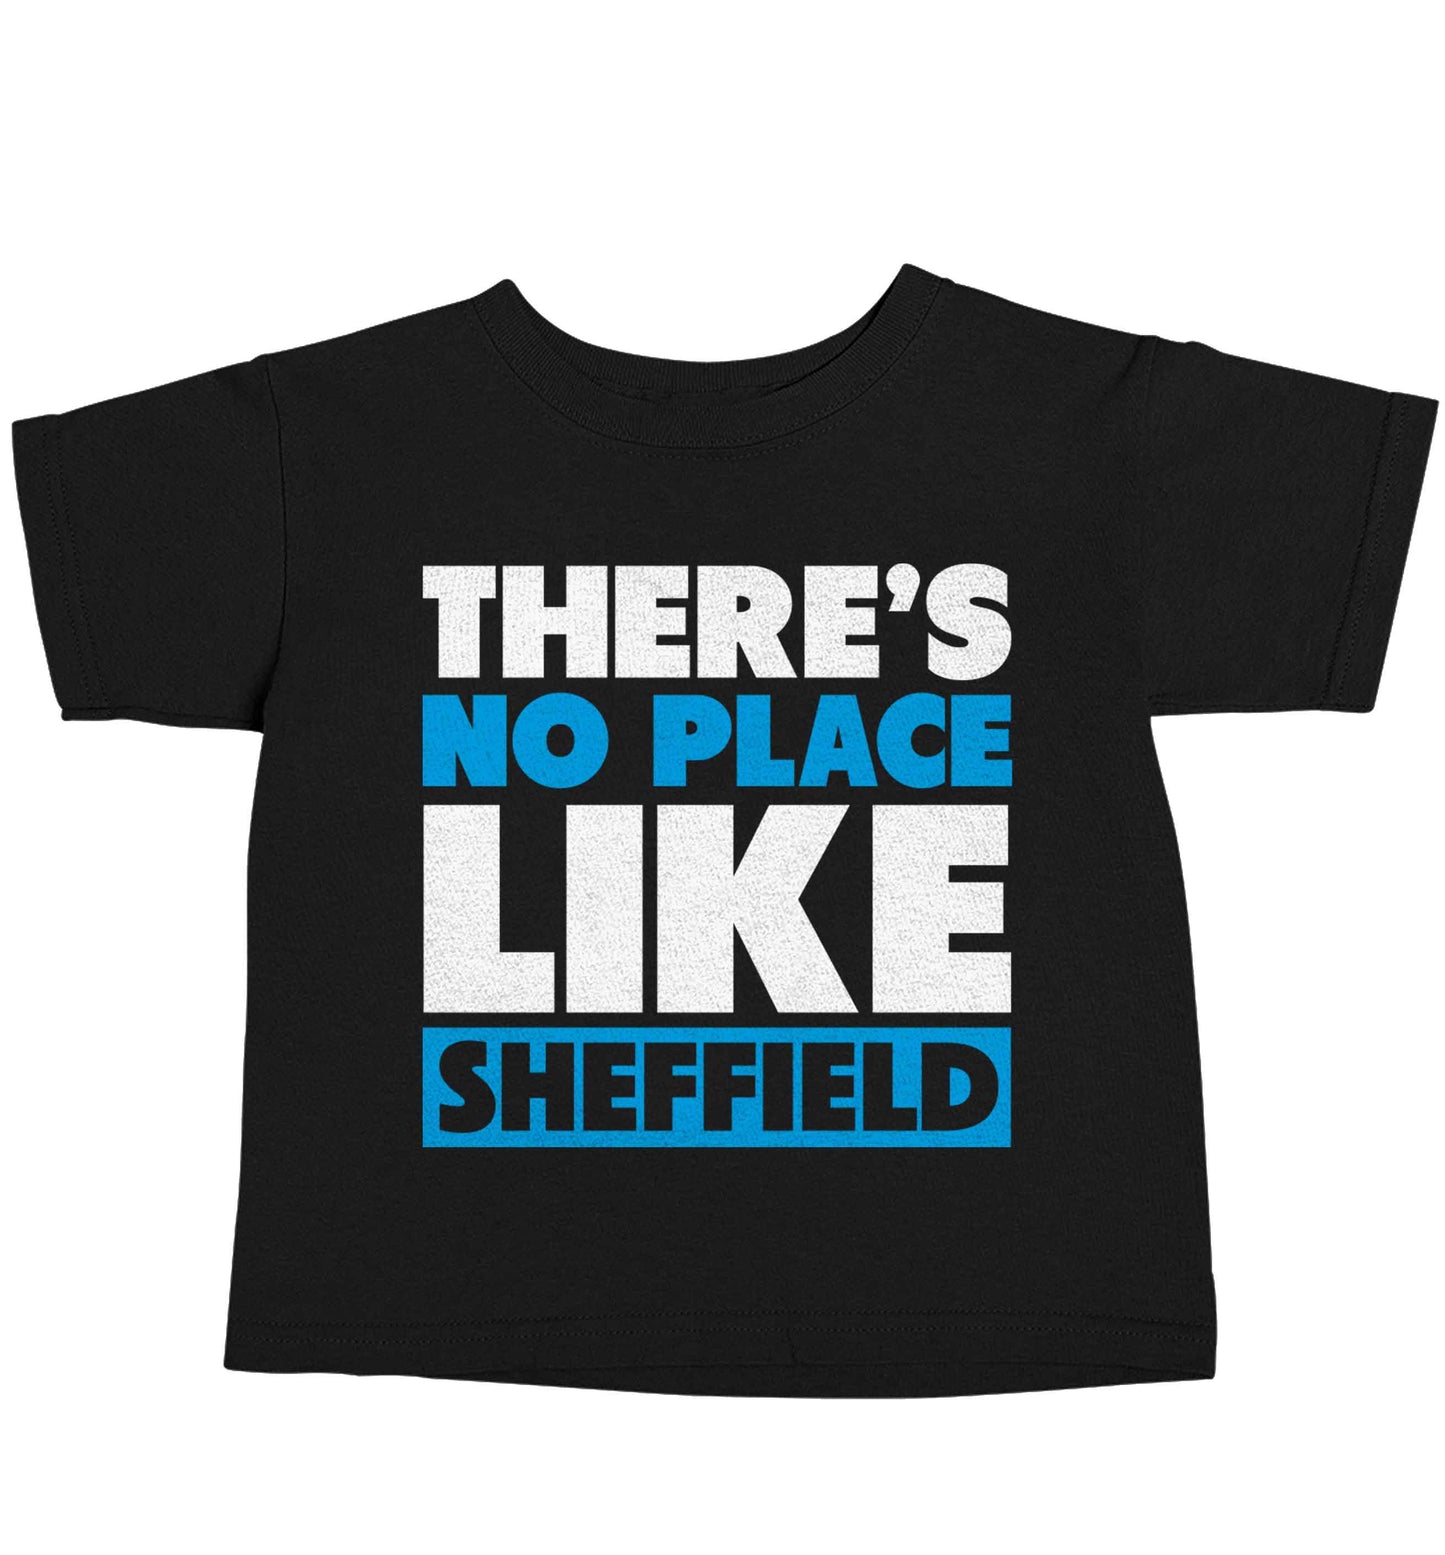 There's no place like Sheffield Black baby toddler Tshirt 2 years